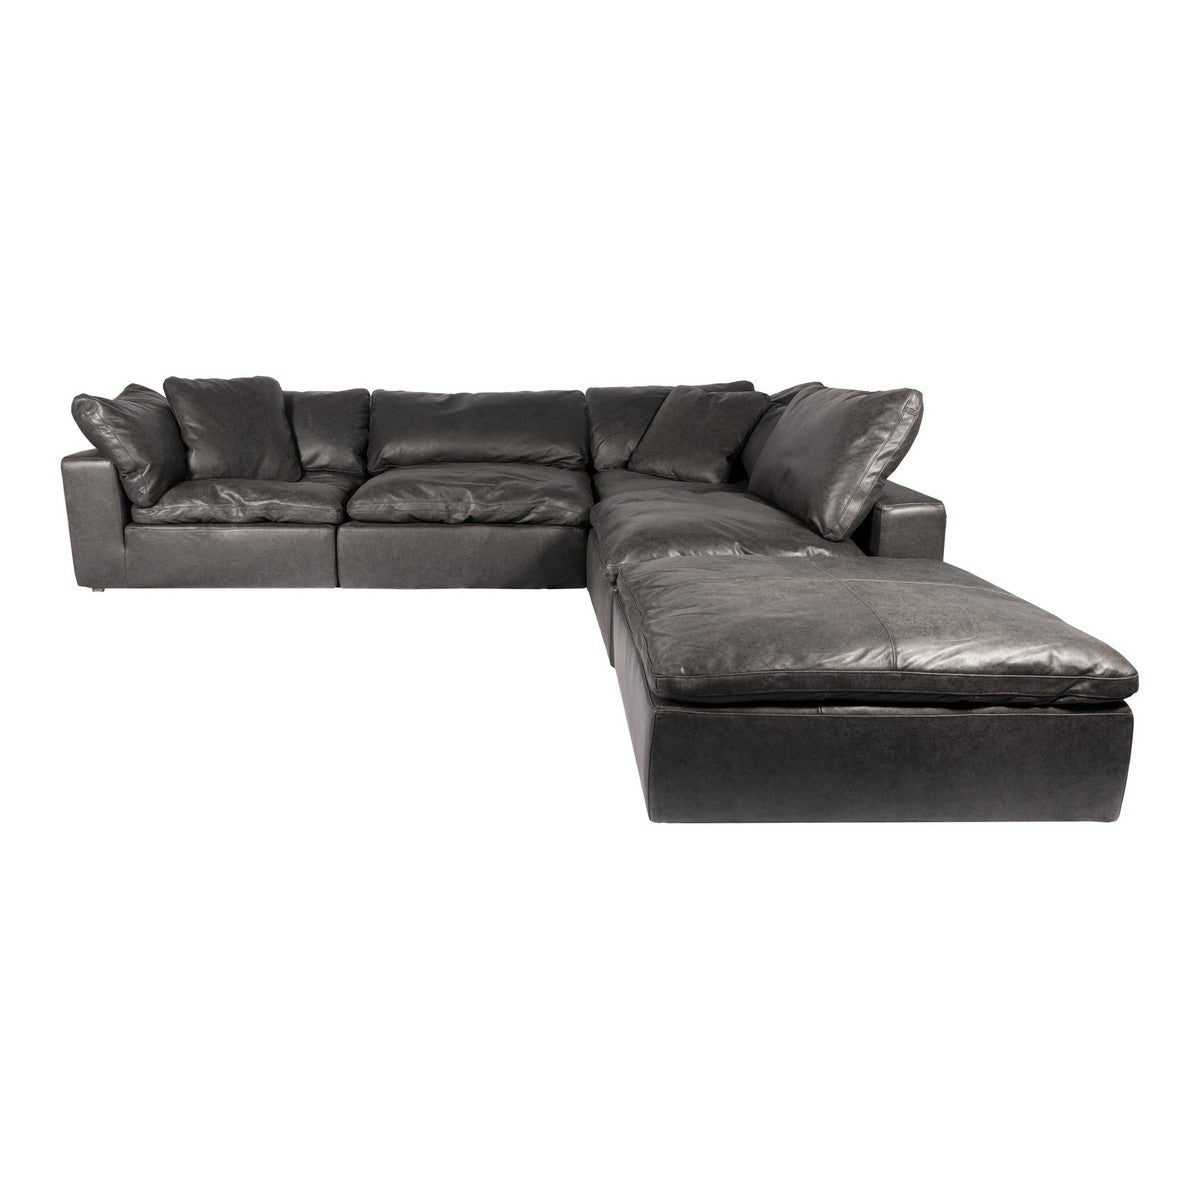 Moe's Home Collection Clay Dream Modular Sectional Nubuck Leather Black - YJ-1011-02 - Moe's Home Collection - Extras - Minimal And Modern - 1